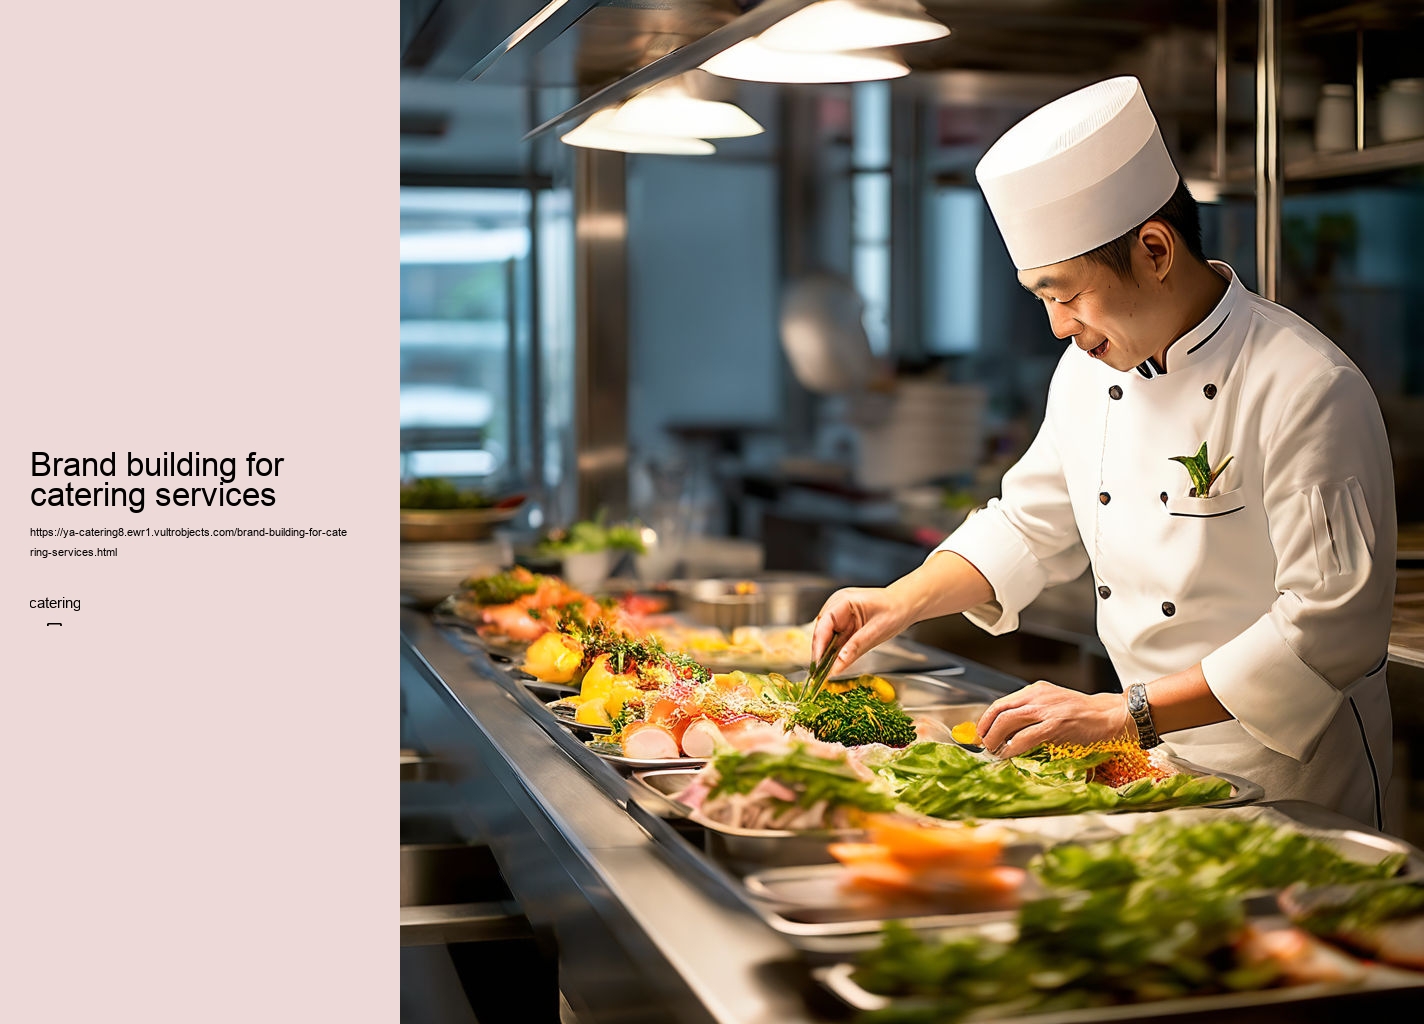 Brand building for catering services